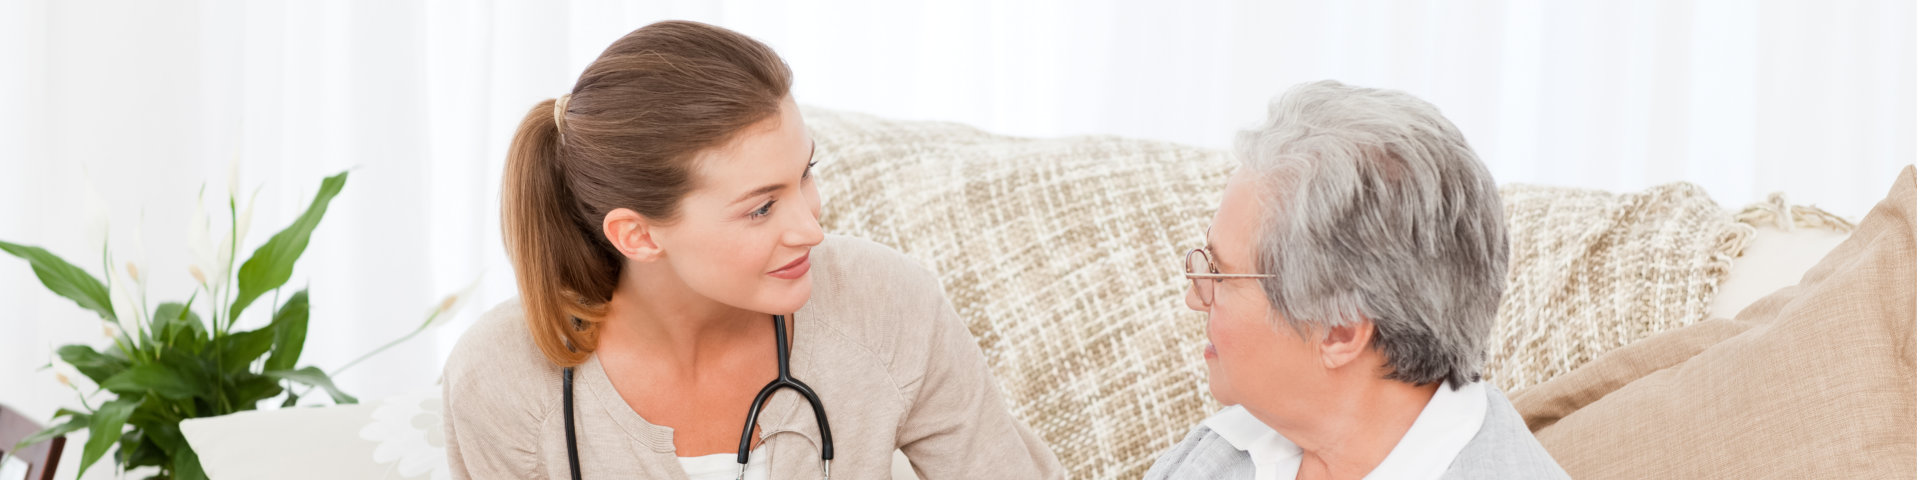 Nurse talking with her patient at home